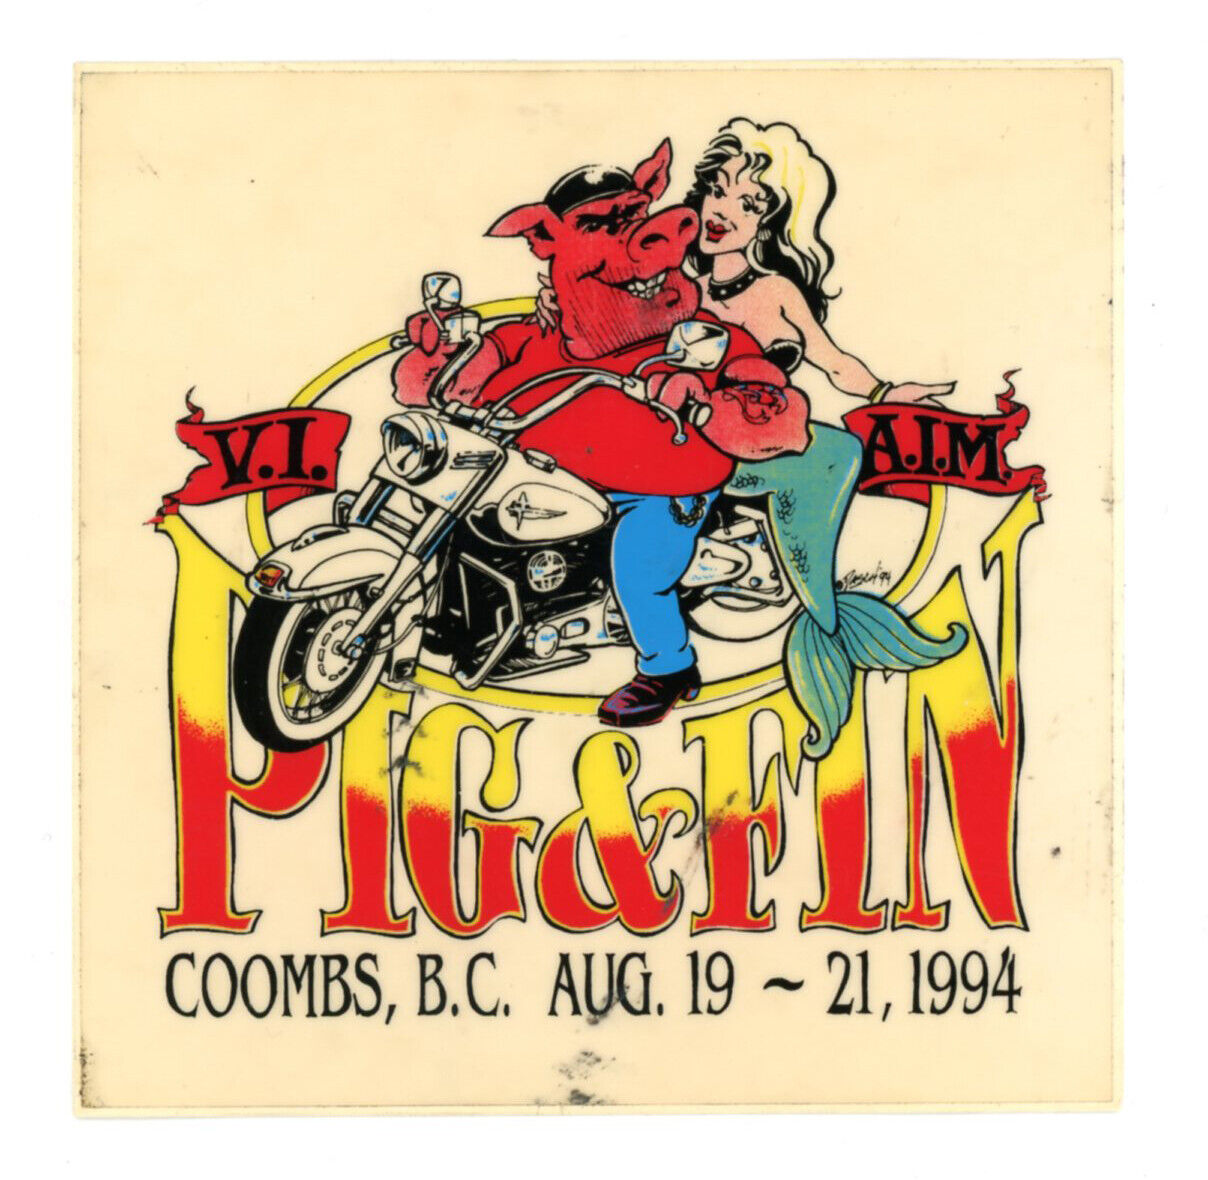 Pig & Fin, Coombs, Bc (1994) Promotional Sticker ~ Vancouver Island A.i.m. Ride